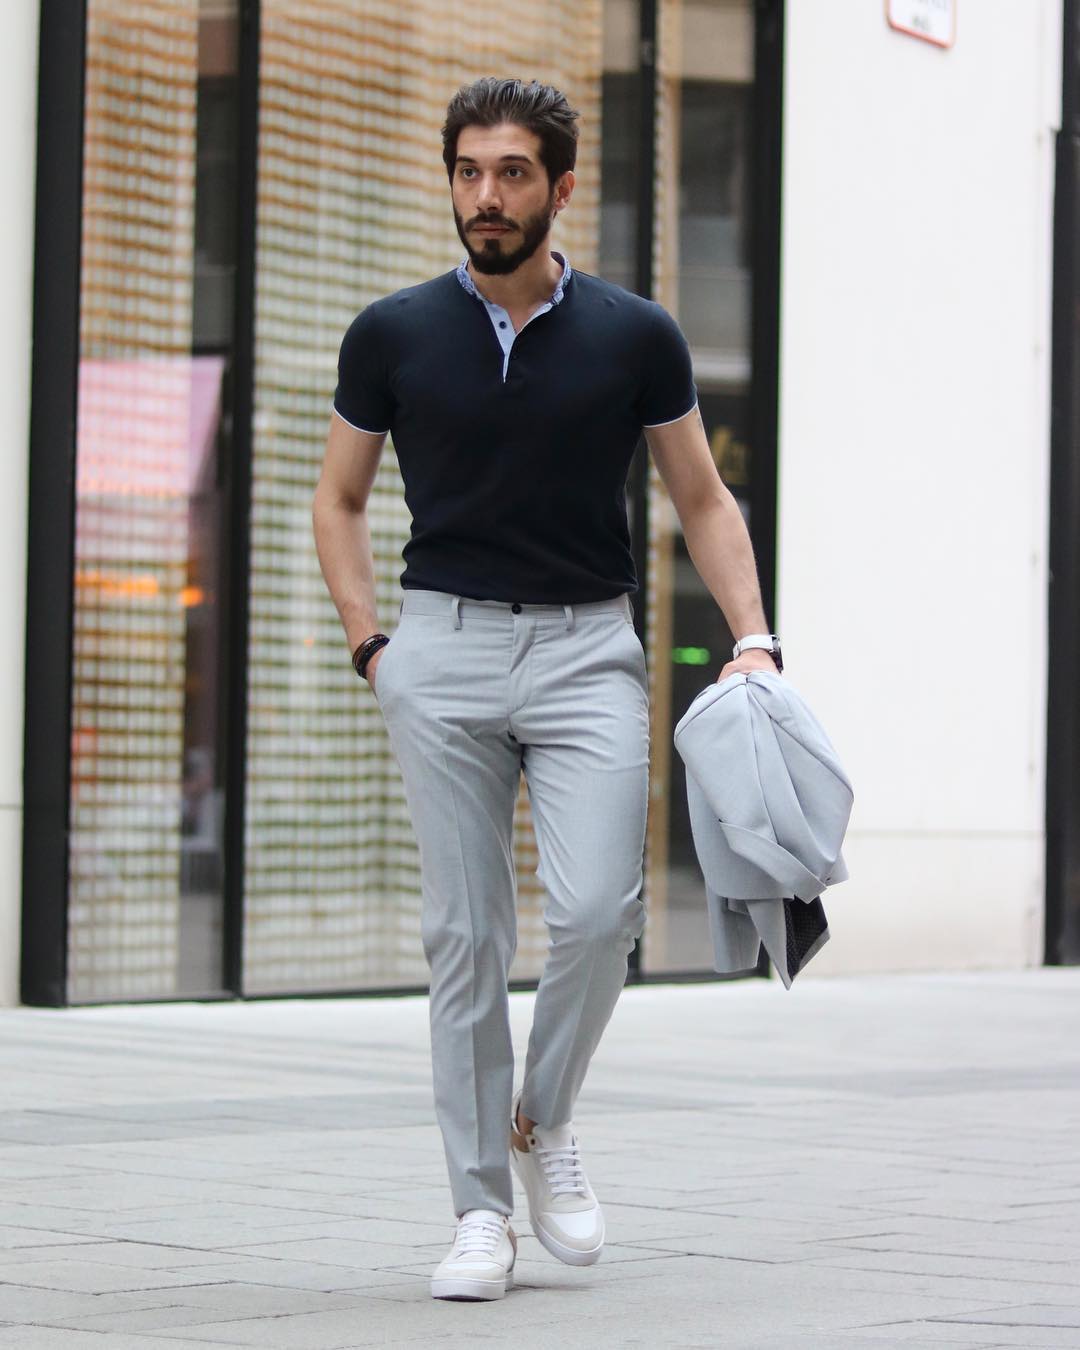 Grey Dress Pants with Print T-shirt Outfits For Men In Their 30s (3 ideas &  outfits)